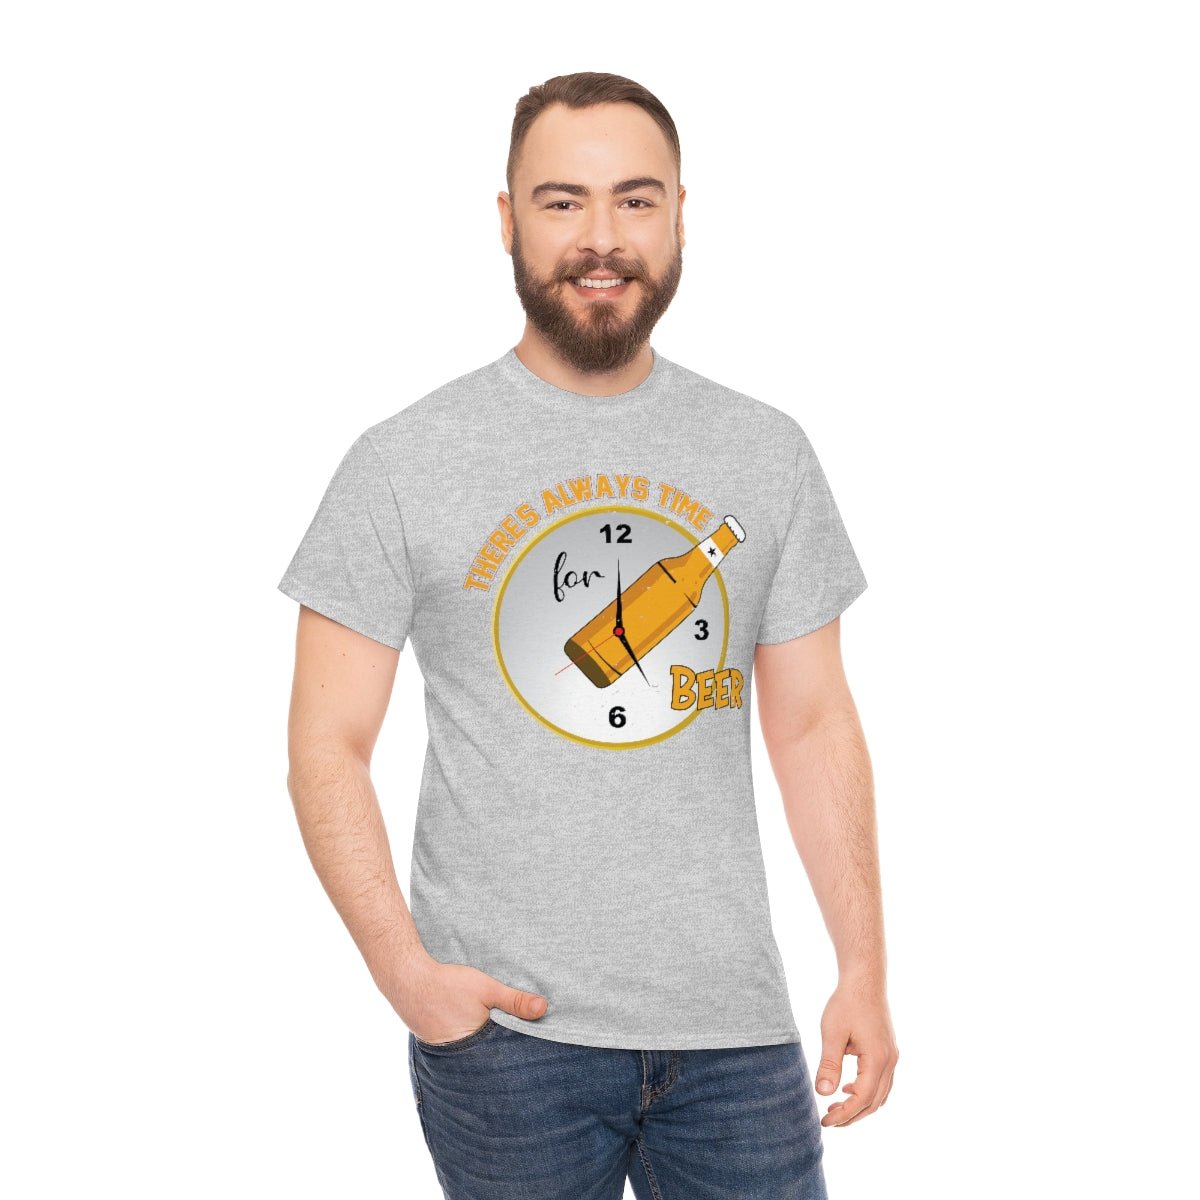 There's always time for beer Men's Heavy Cotton Tee - Salty Medic Clothing Co.